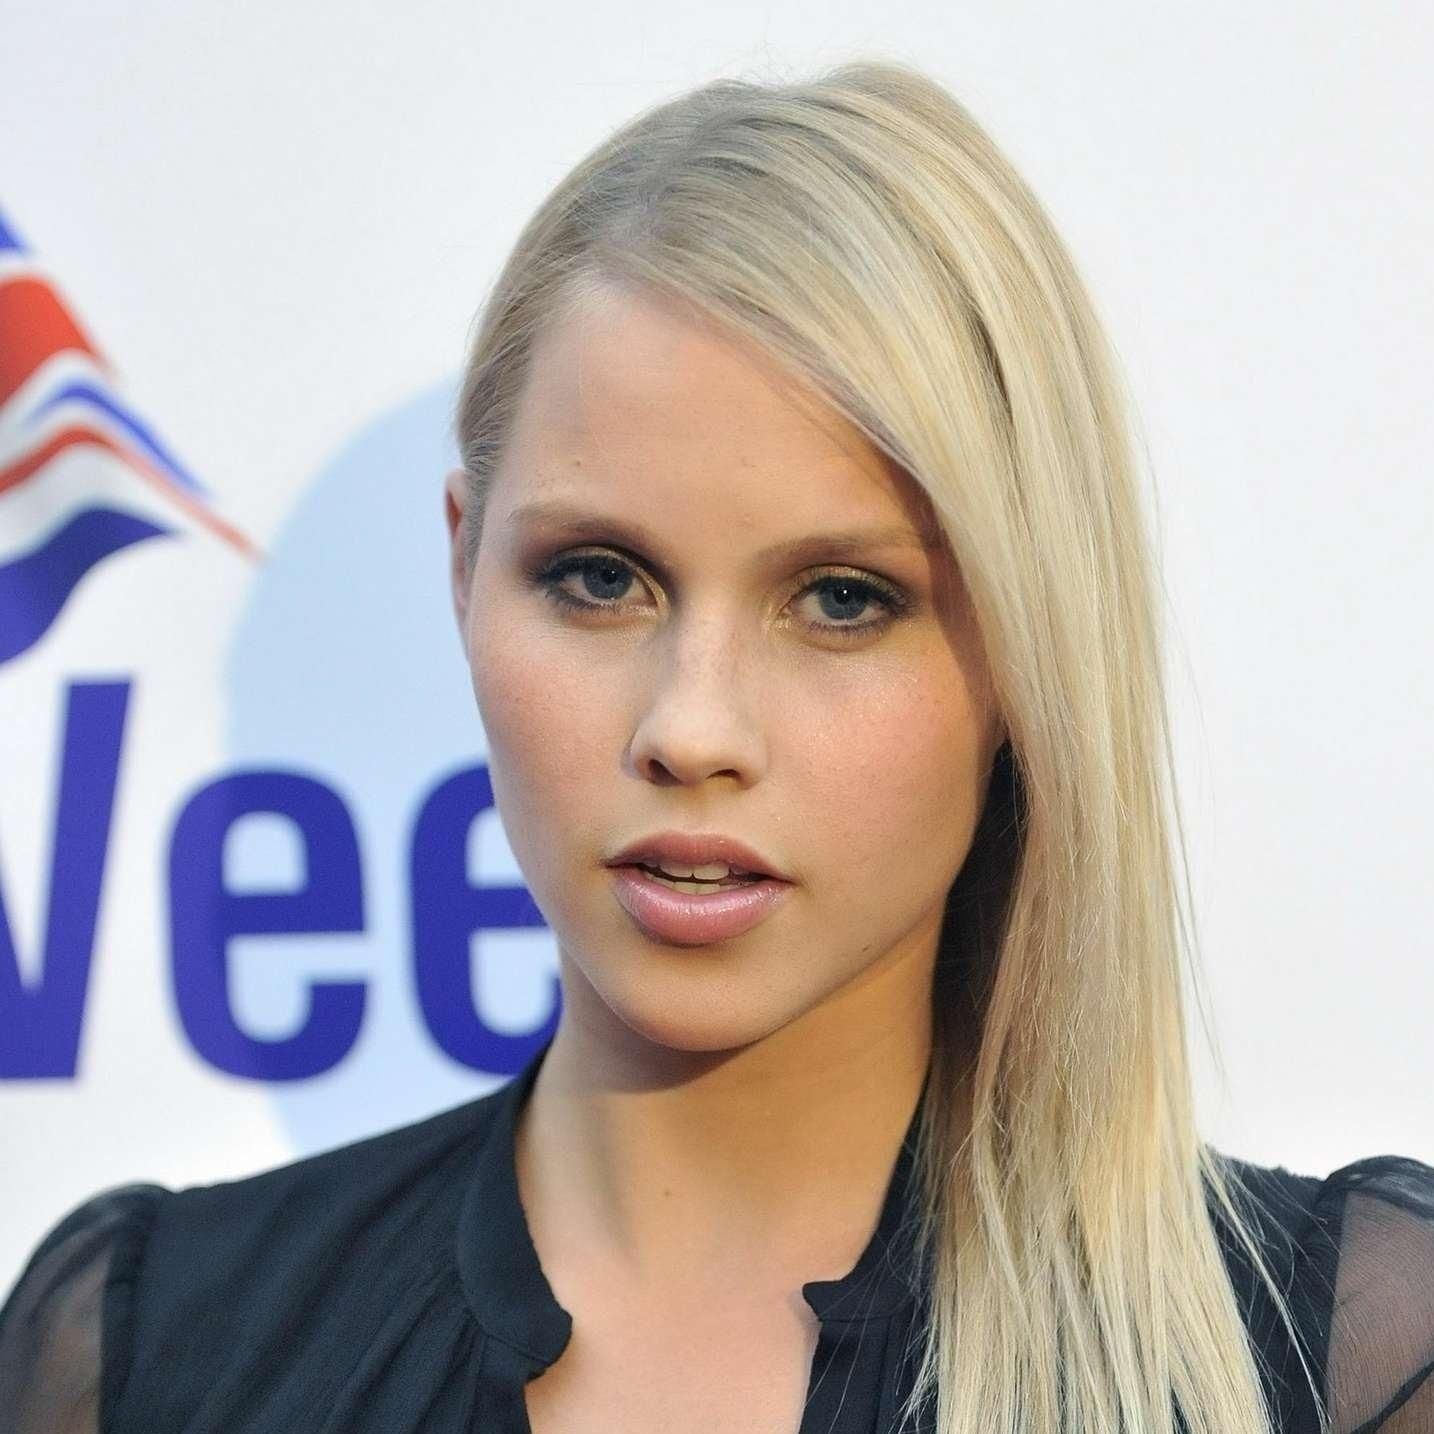 Claire Holt - Wikipedia